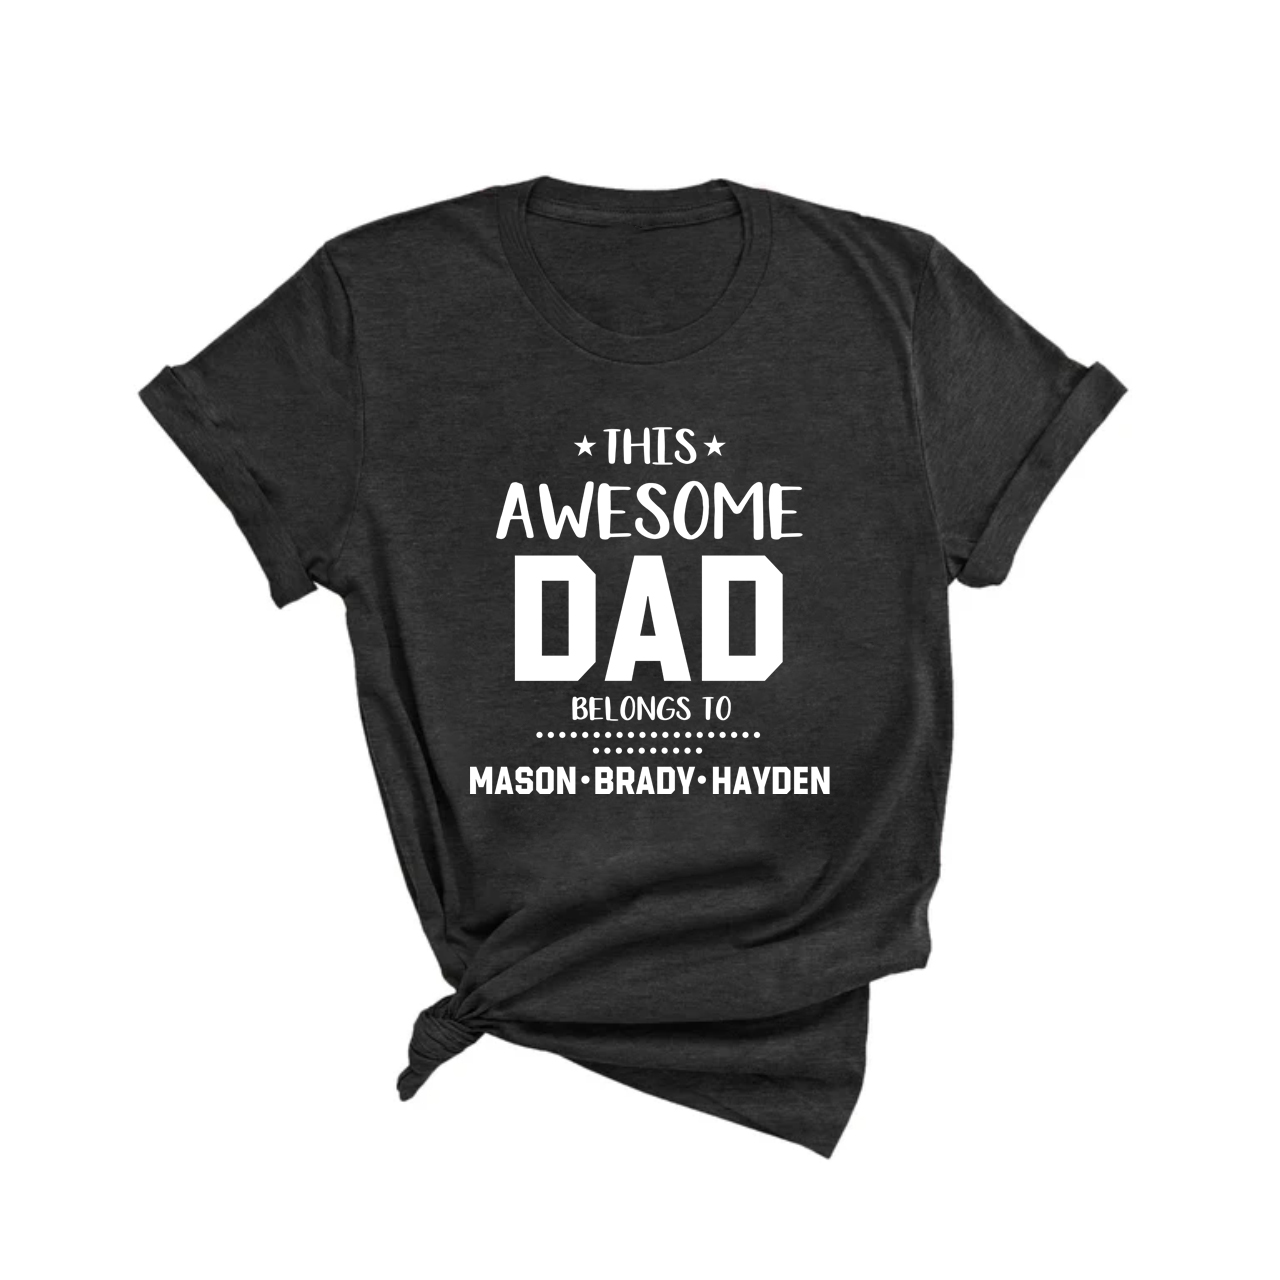 2 Colors Personalized This Awesome Dad Belongs To Shirt